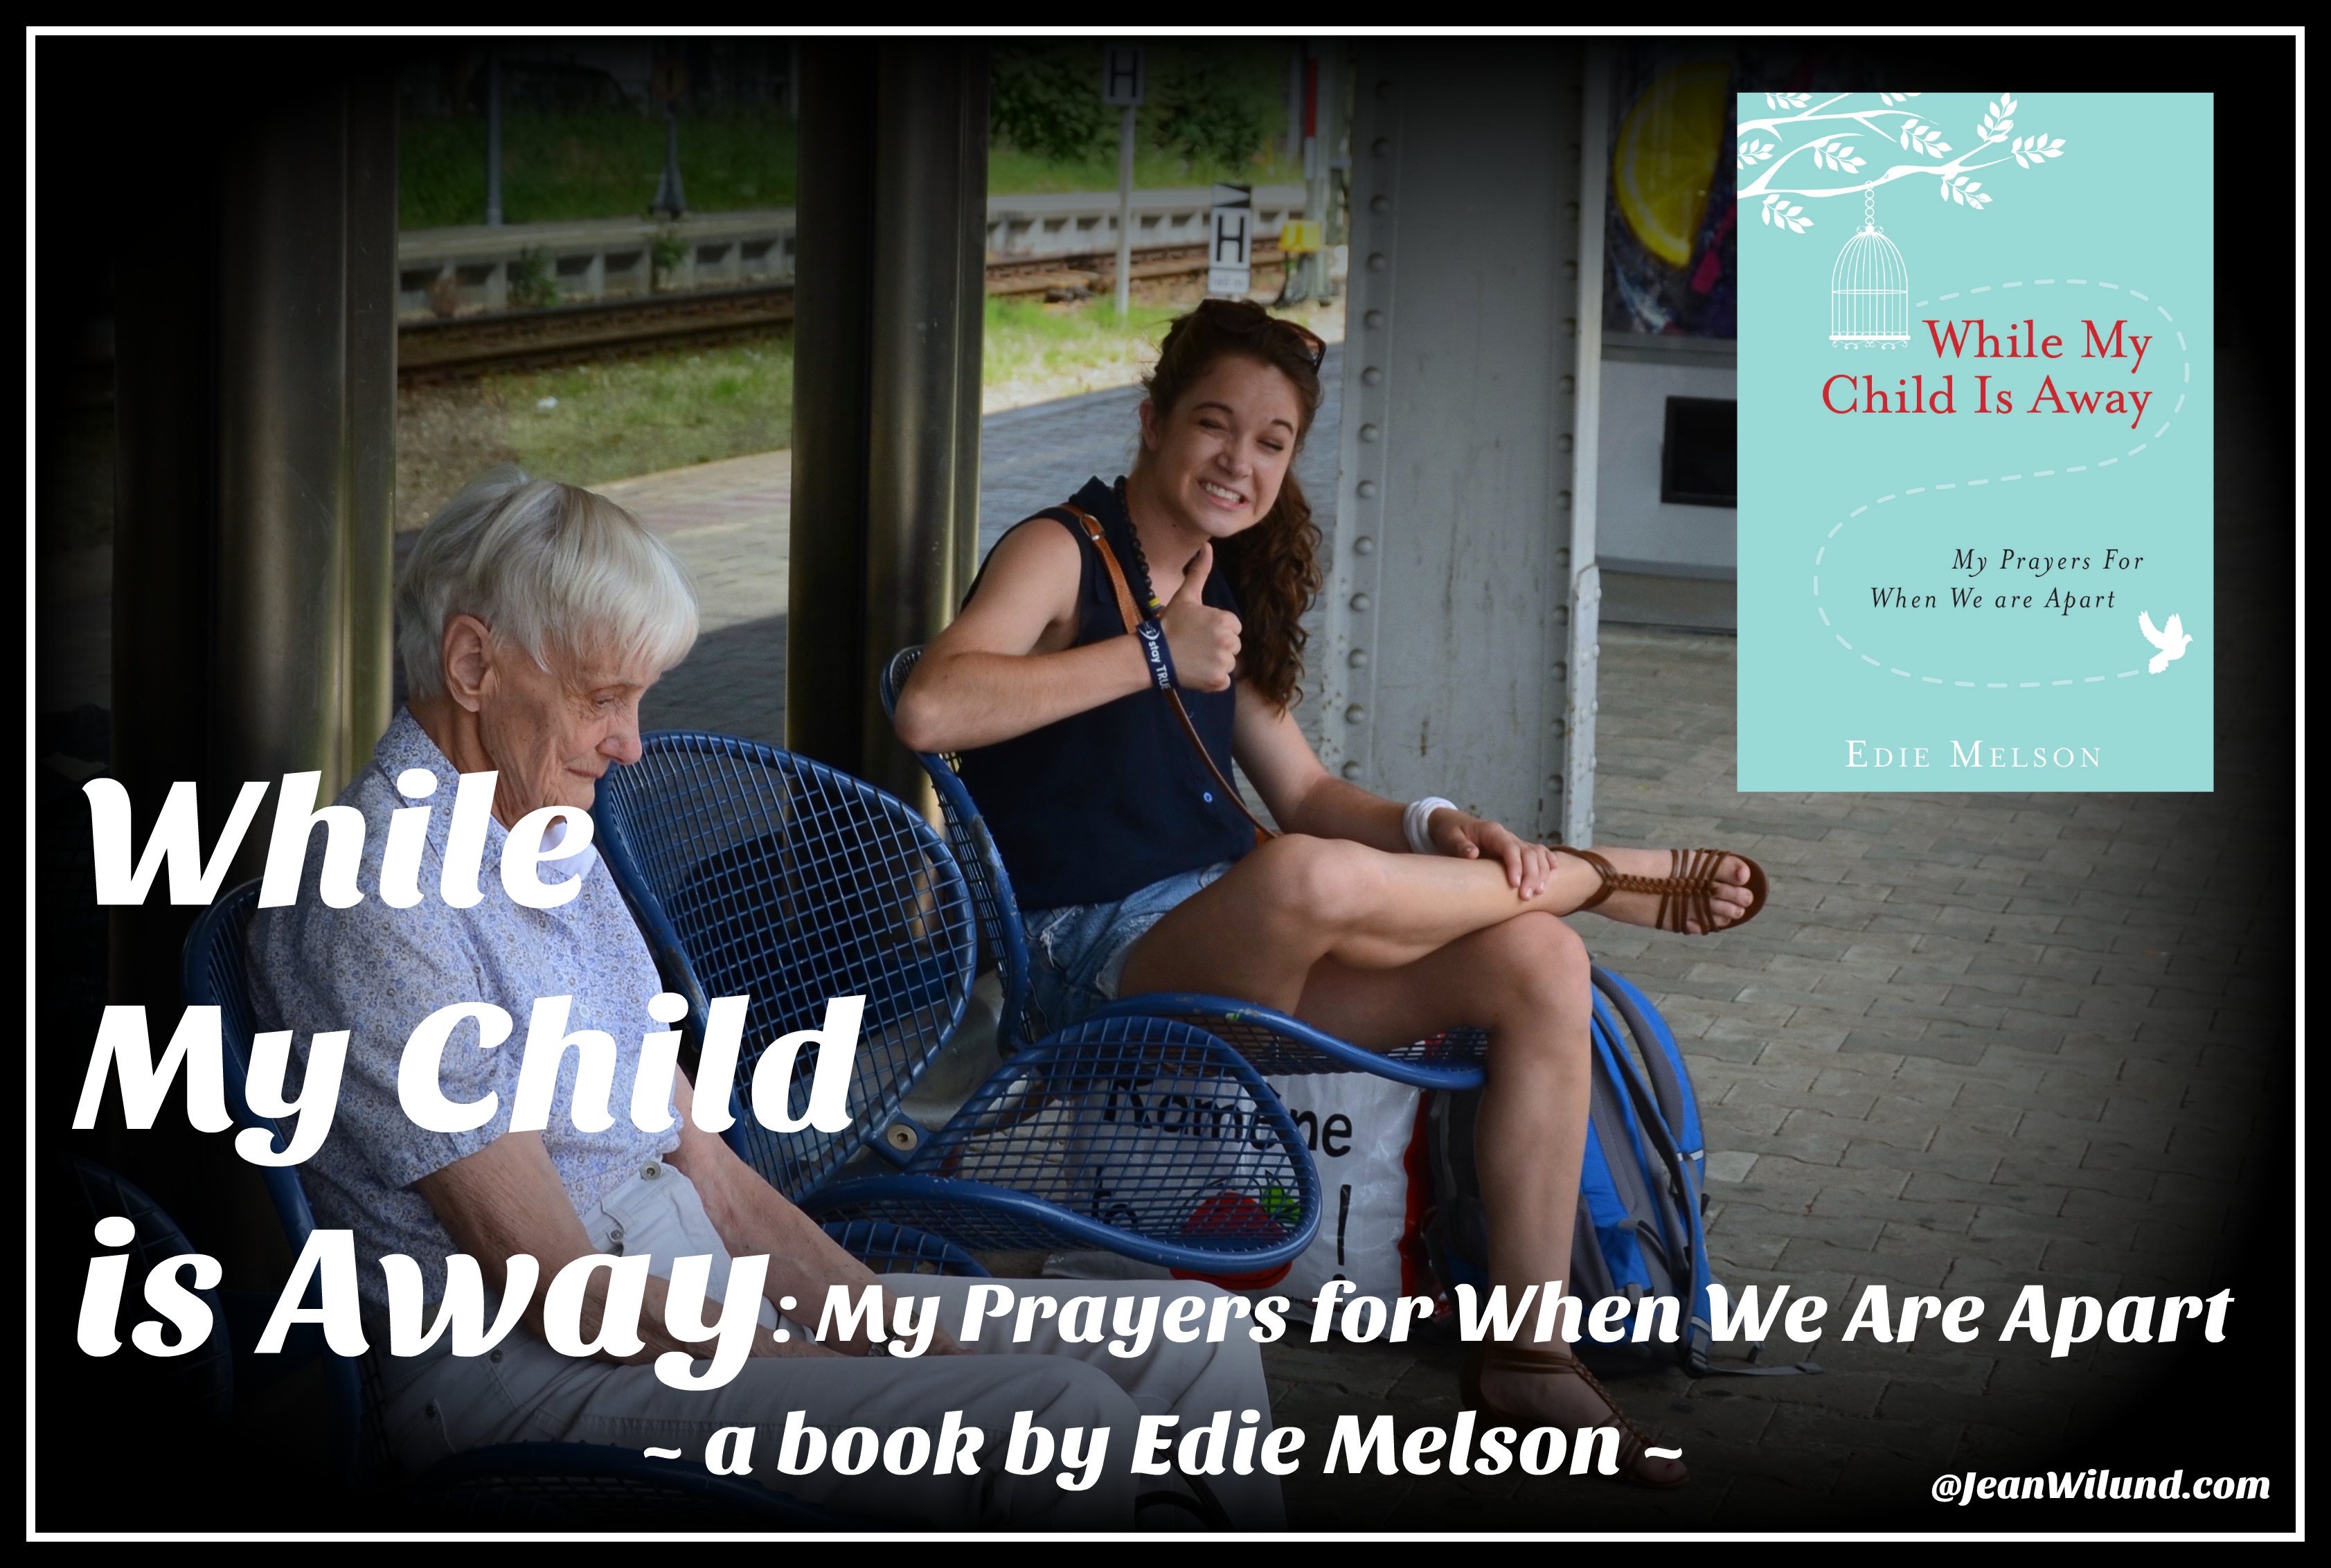 Is your child away? Learn how to best pray. While My Child is Away (a book by Edie Melson) Interview by Jean Wilund